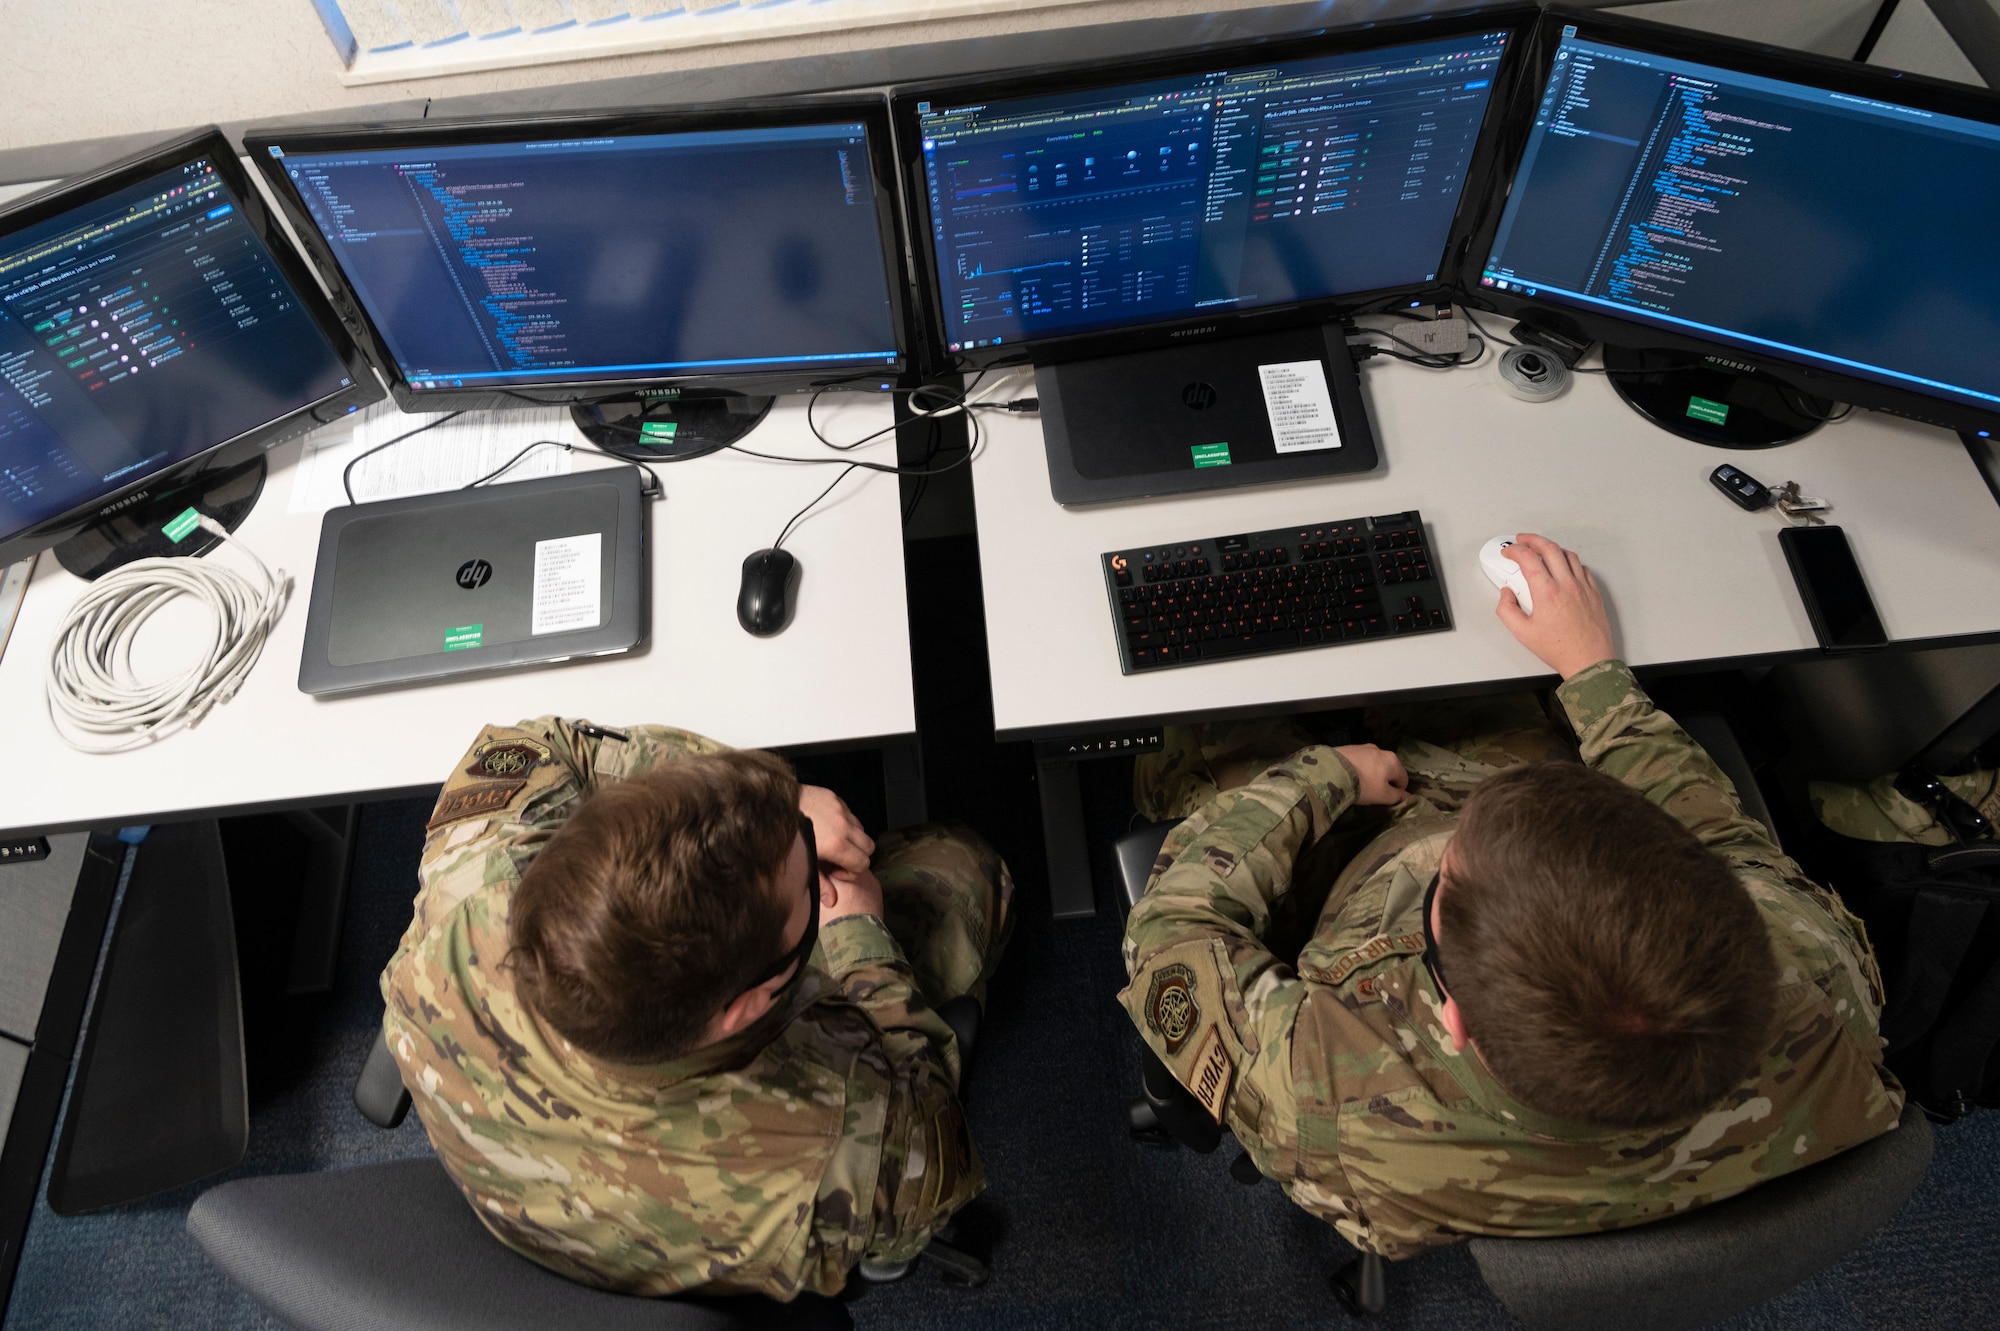 Airman works on computer